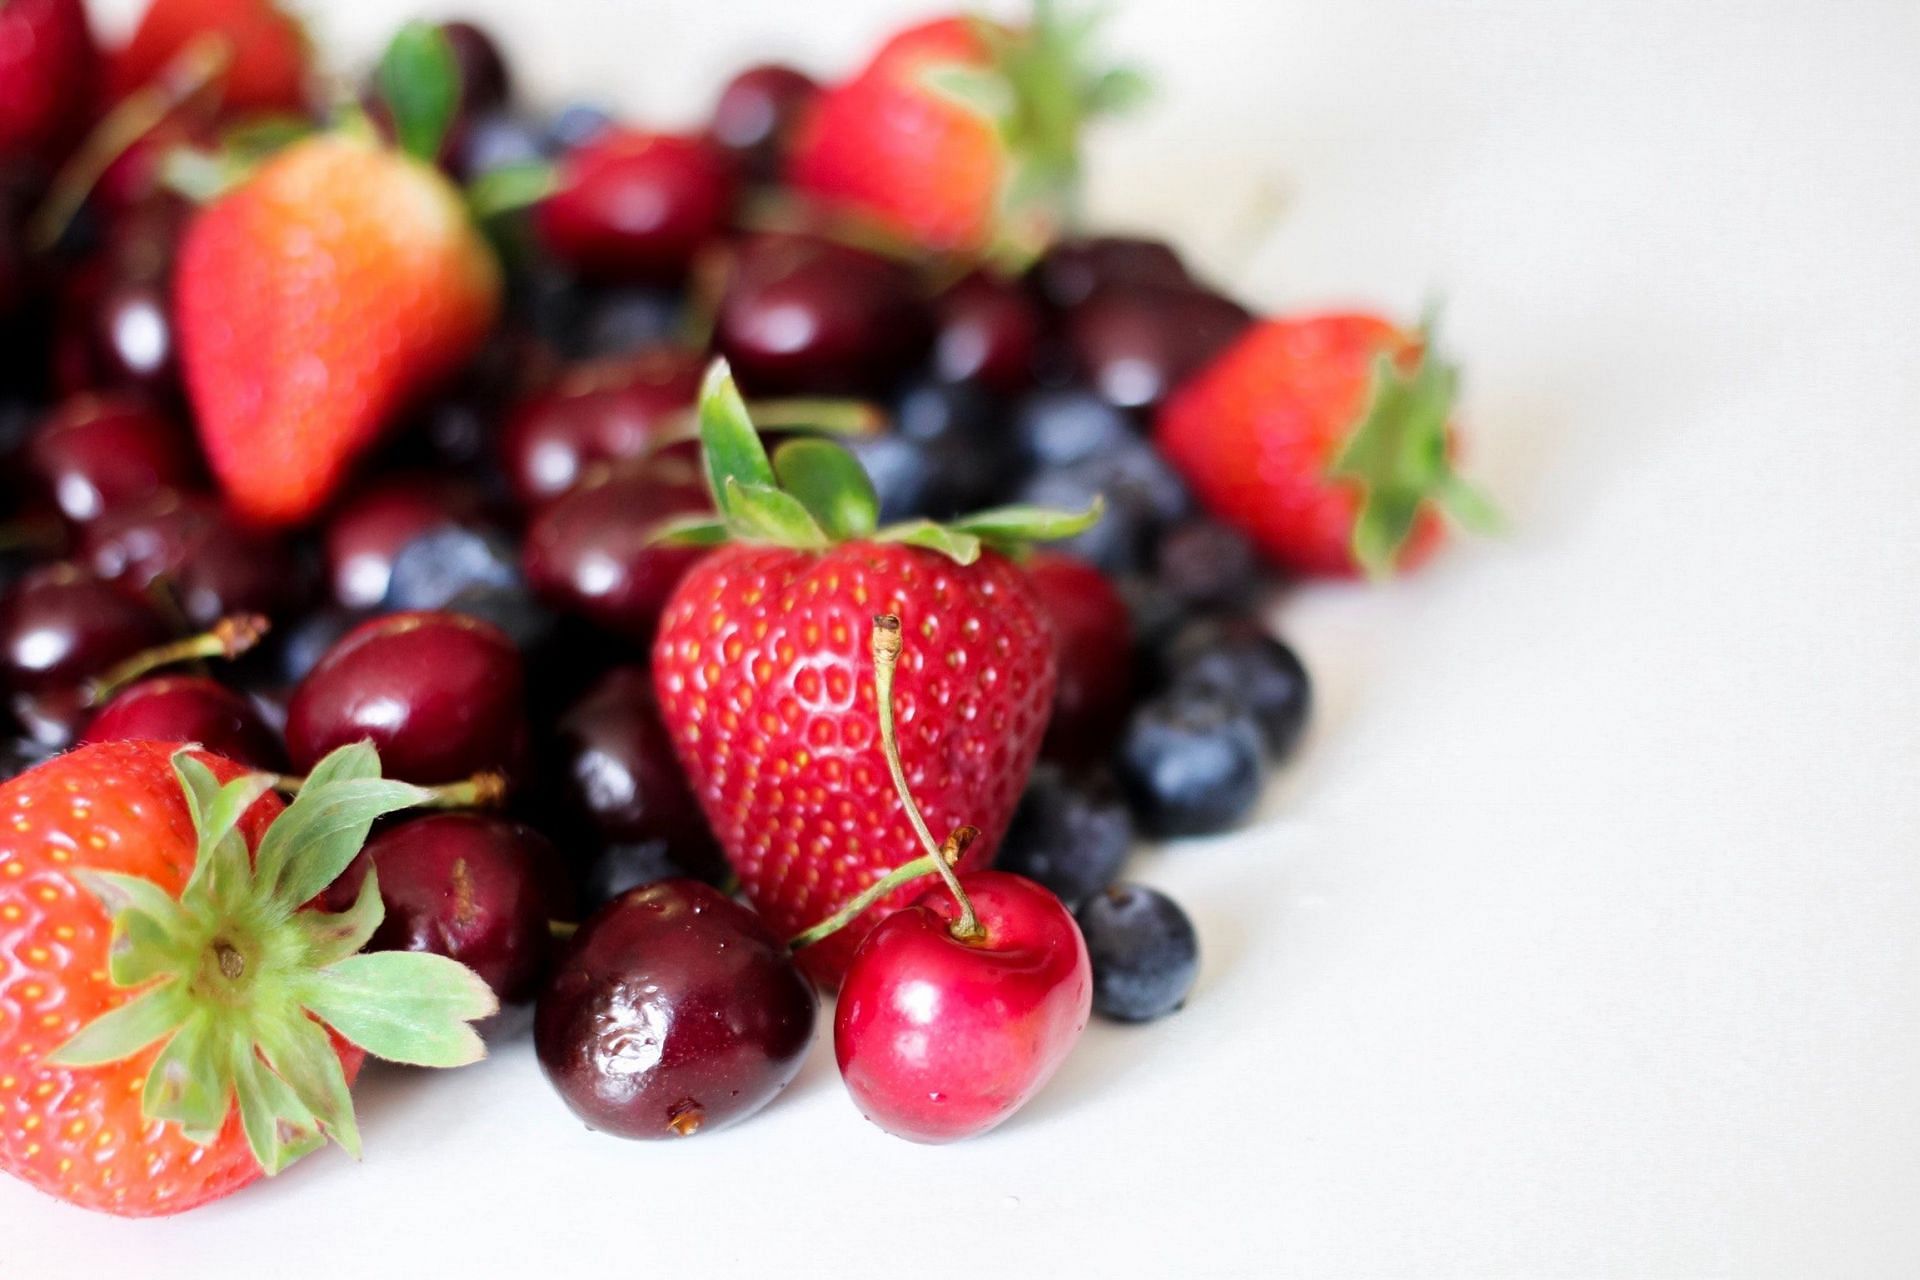 Berries: One of the foods to eat for dandruff-free hair (Image via Pexels)